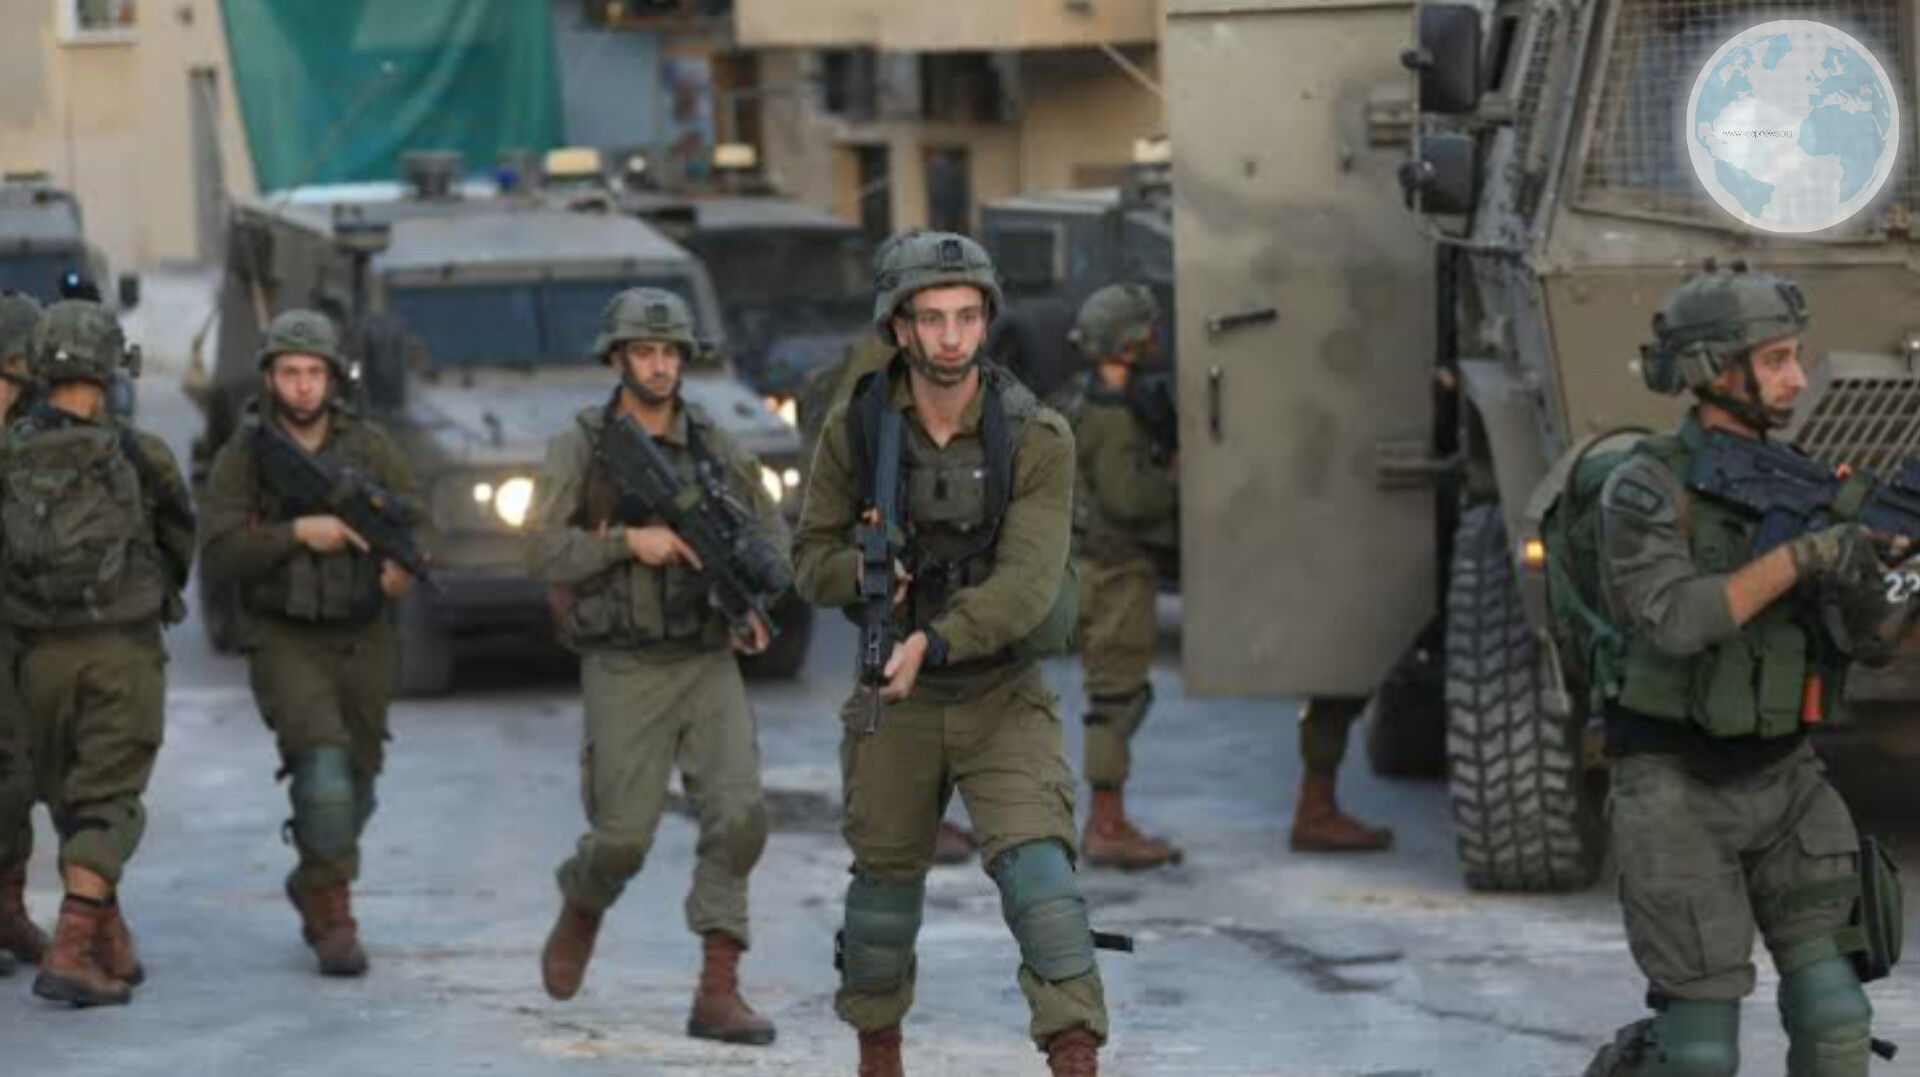 2 People Died due to Firing by the Israeli Army in the Palestinian Territory of Jenin